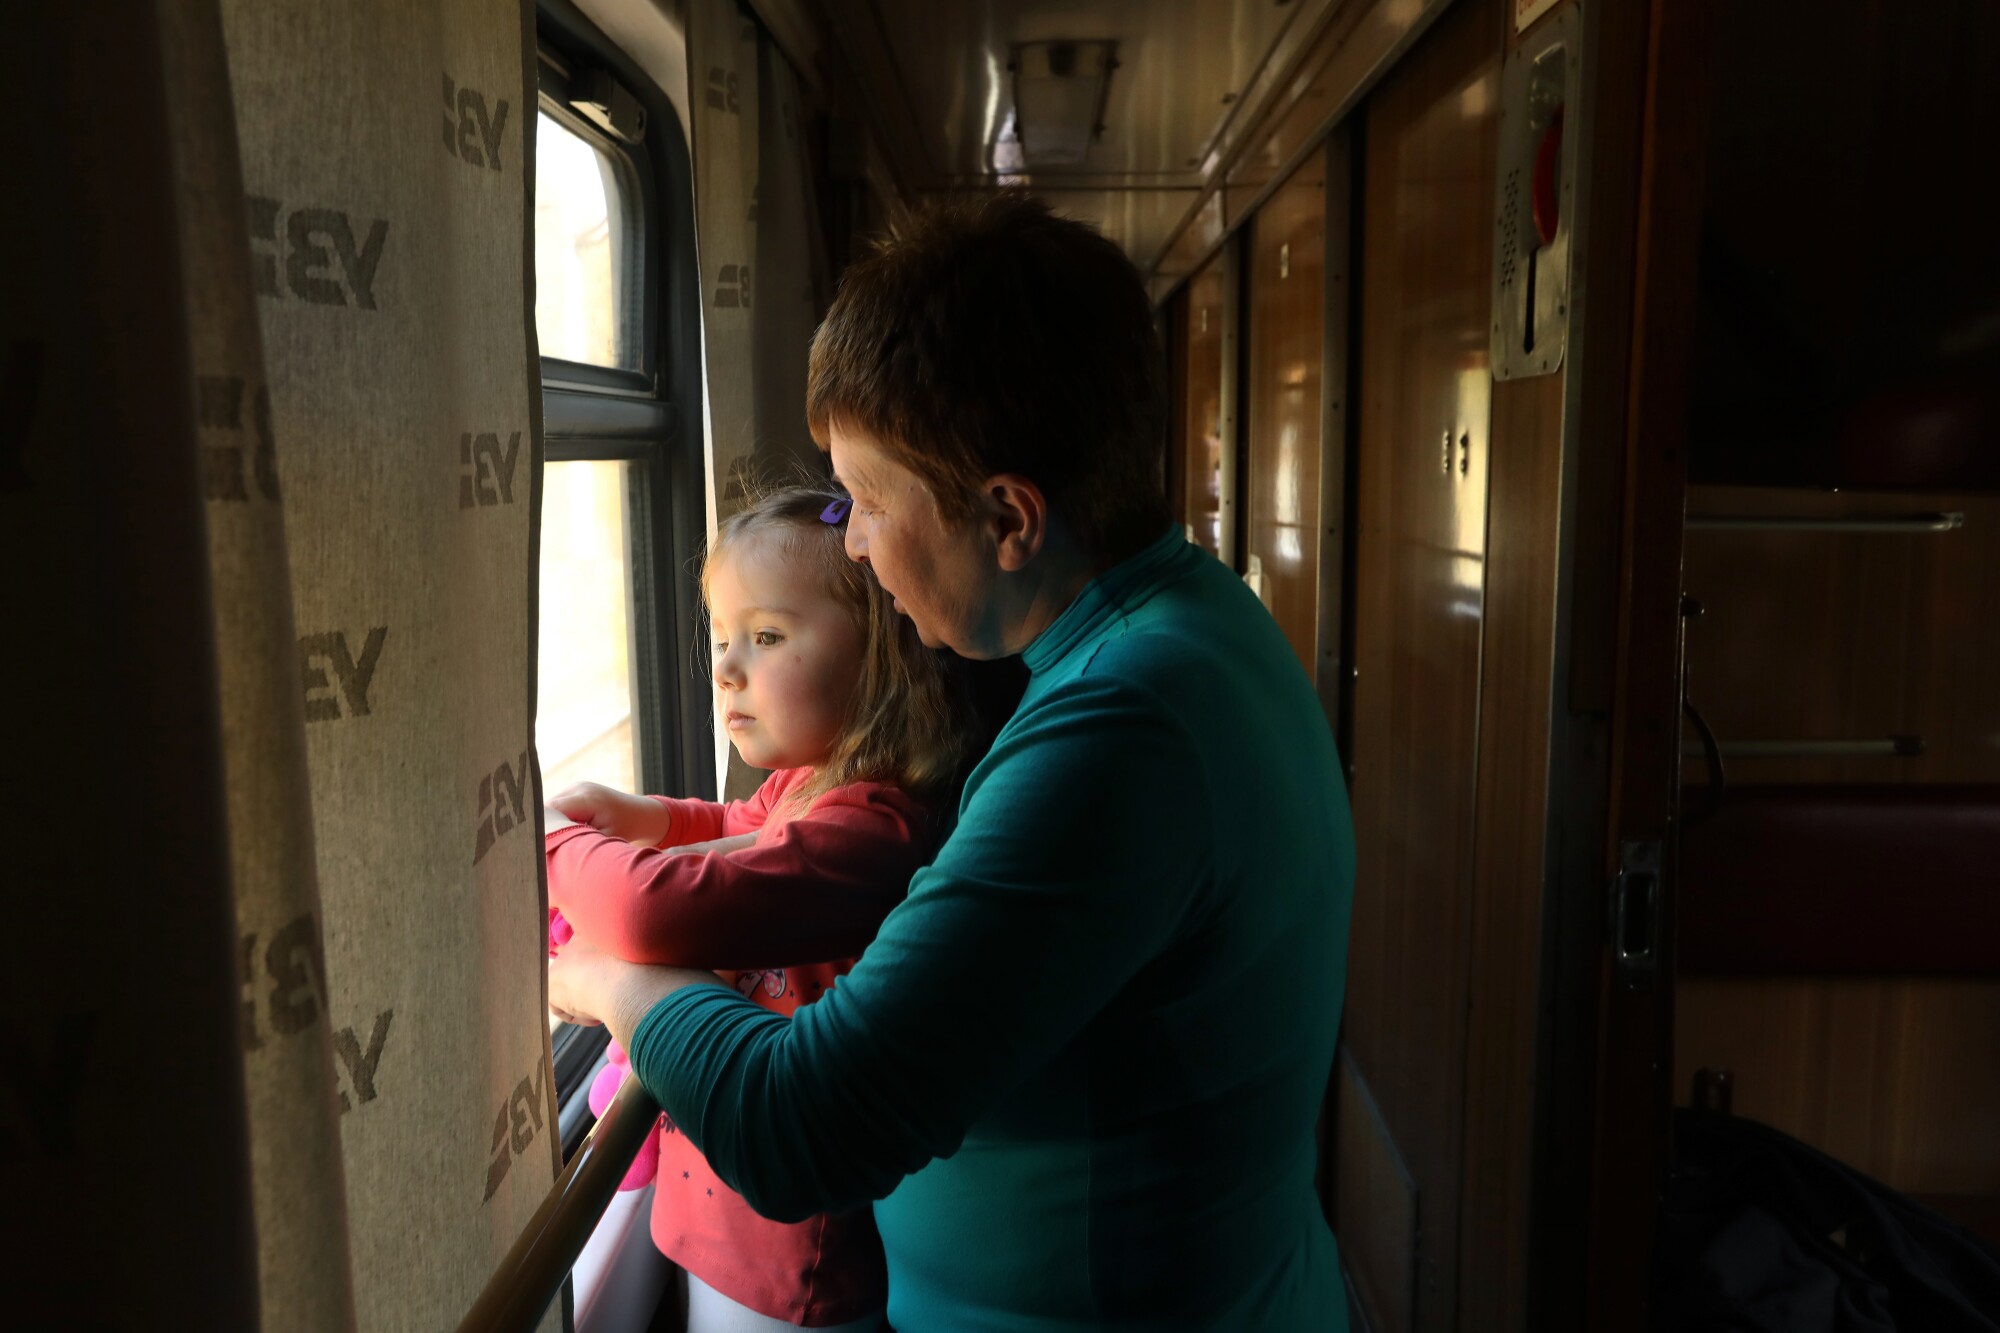 A woman in a green top and a girl in a pink shirt in front of her are looking out a window 